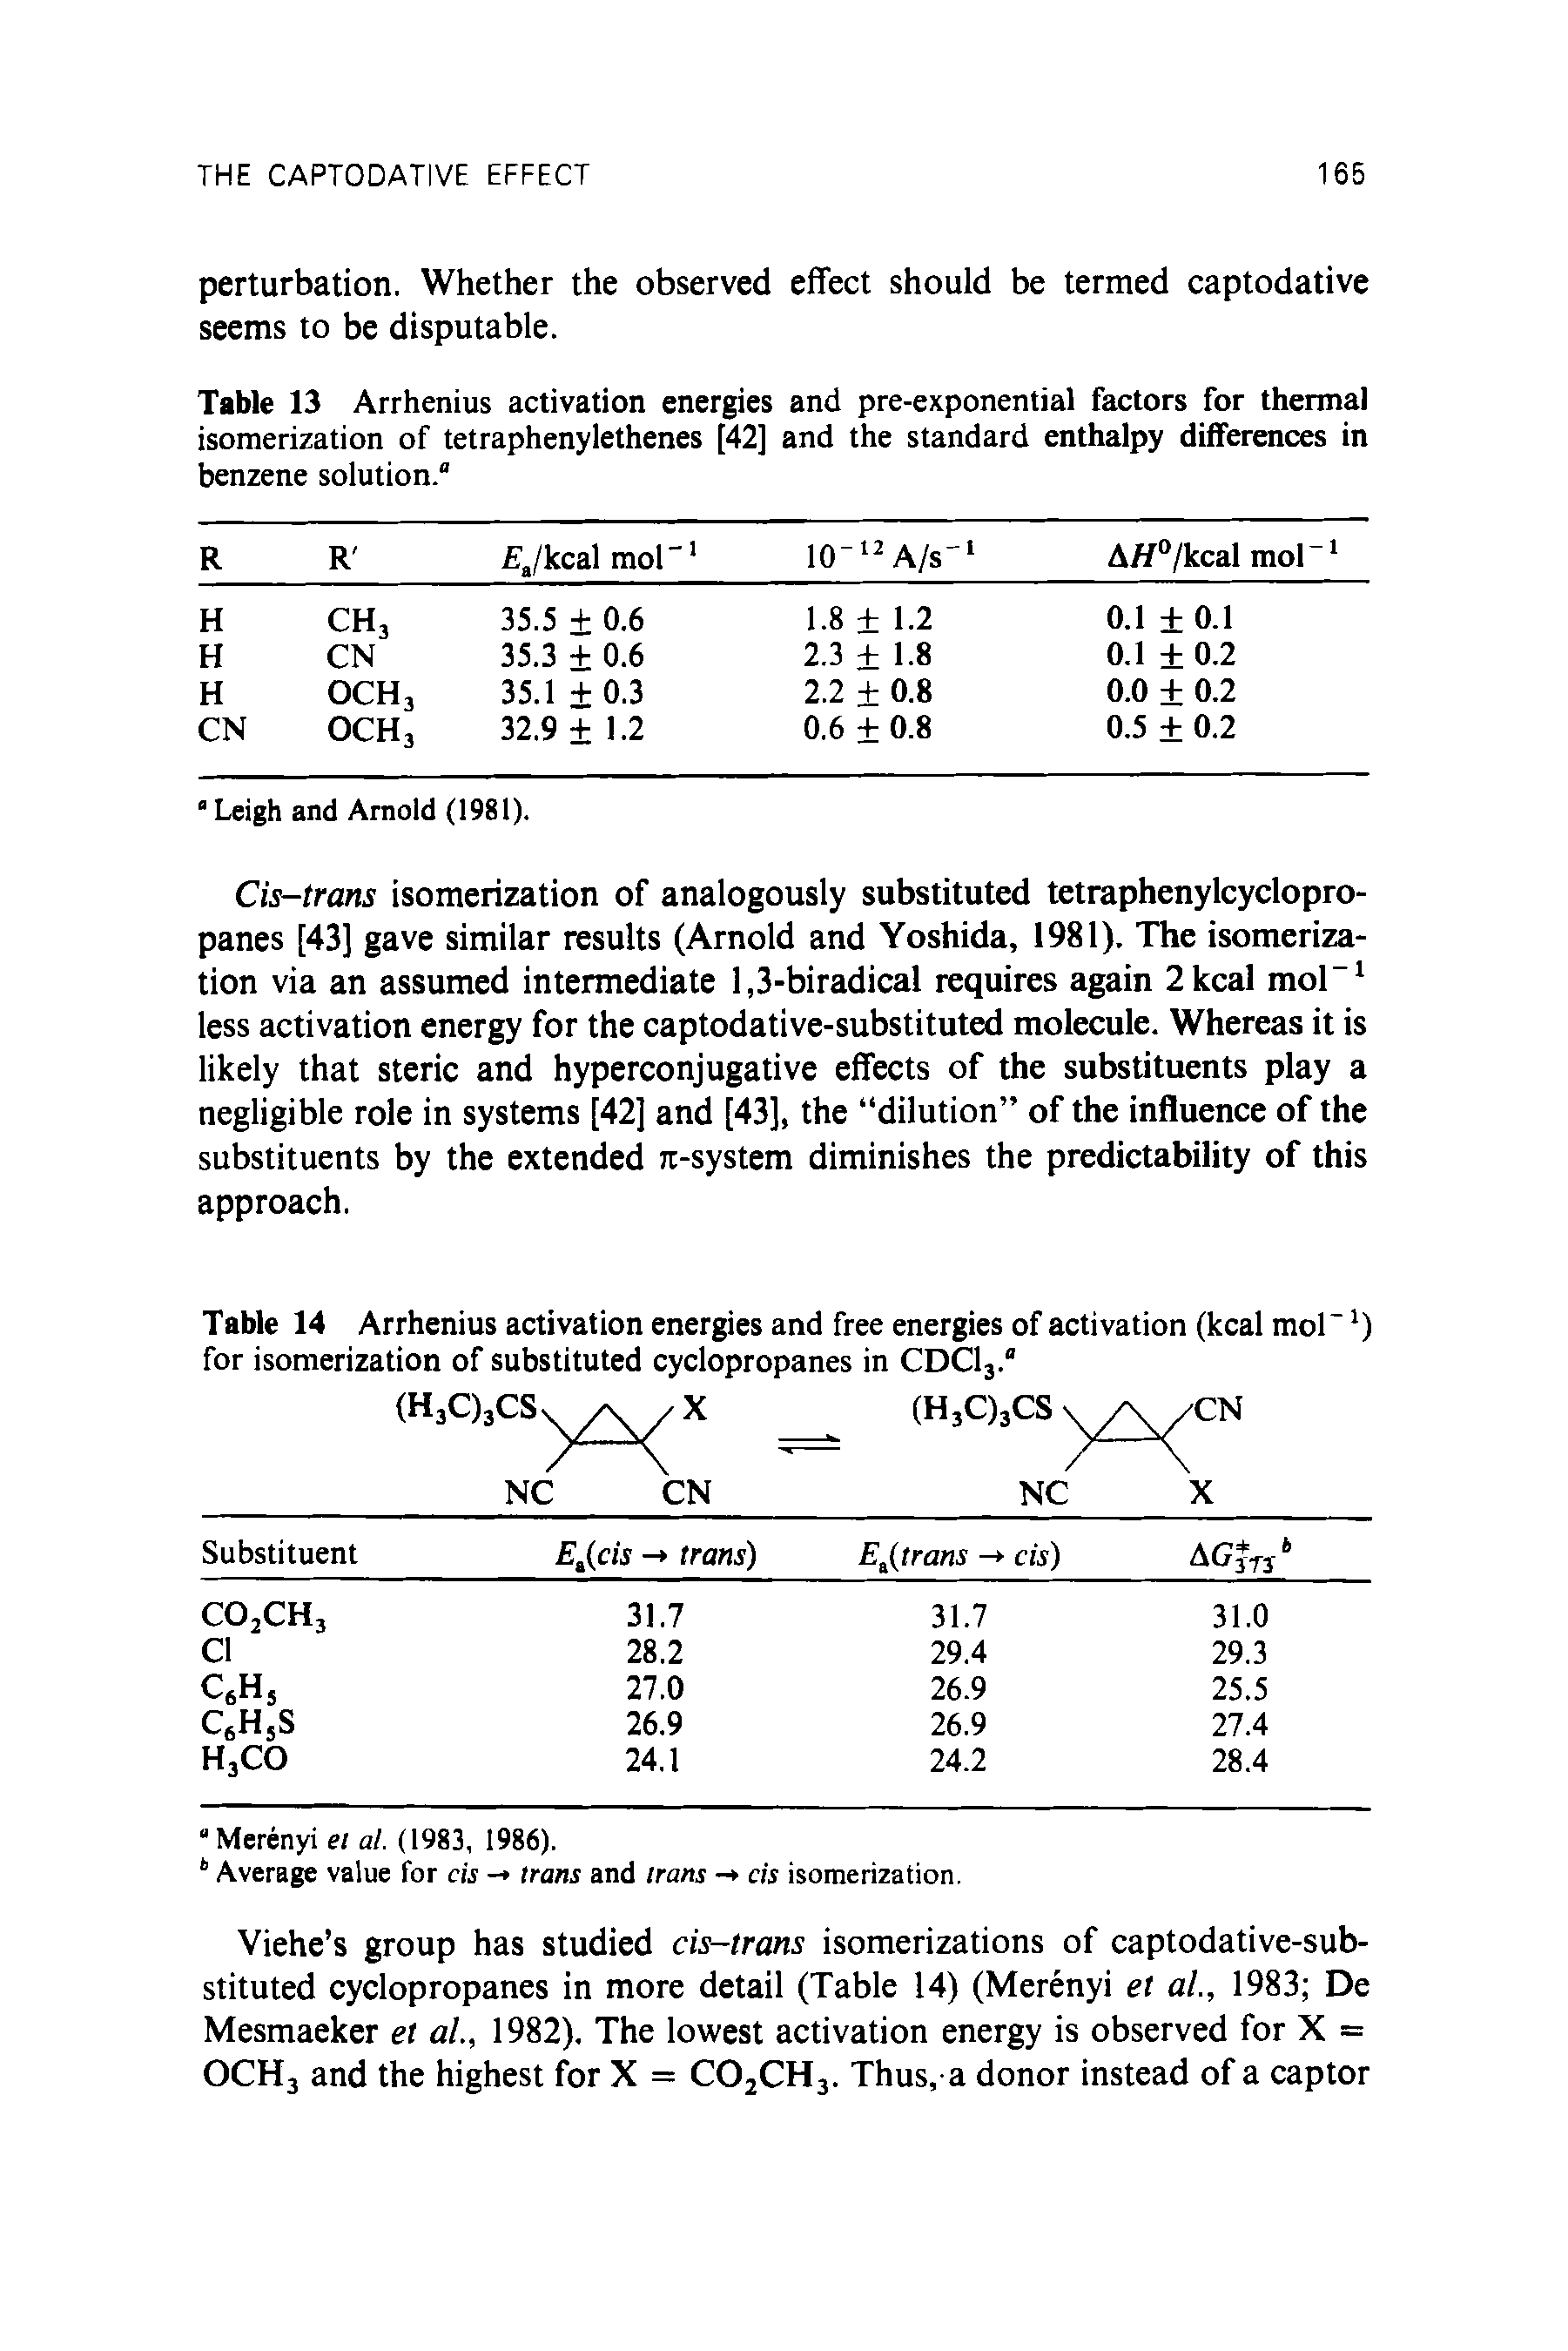 Table 13 Arrhenius activation energies and pre-exponential factors for thermal isomerization of tetraphenylethenes [42] and the standard enthalpy differences in benzene solution."...